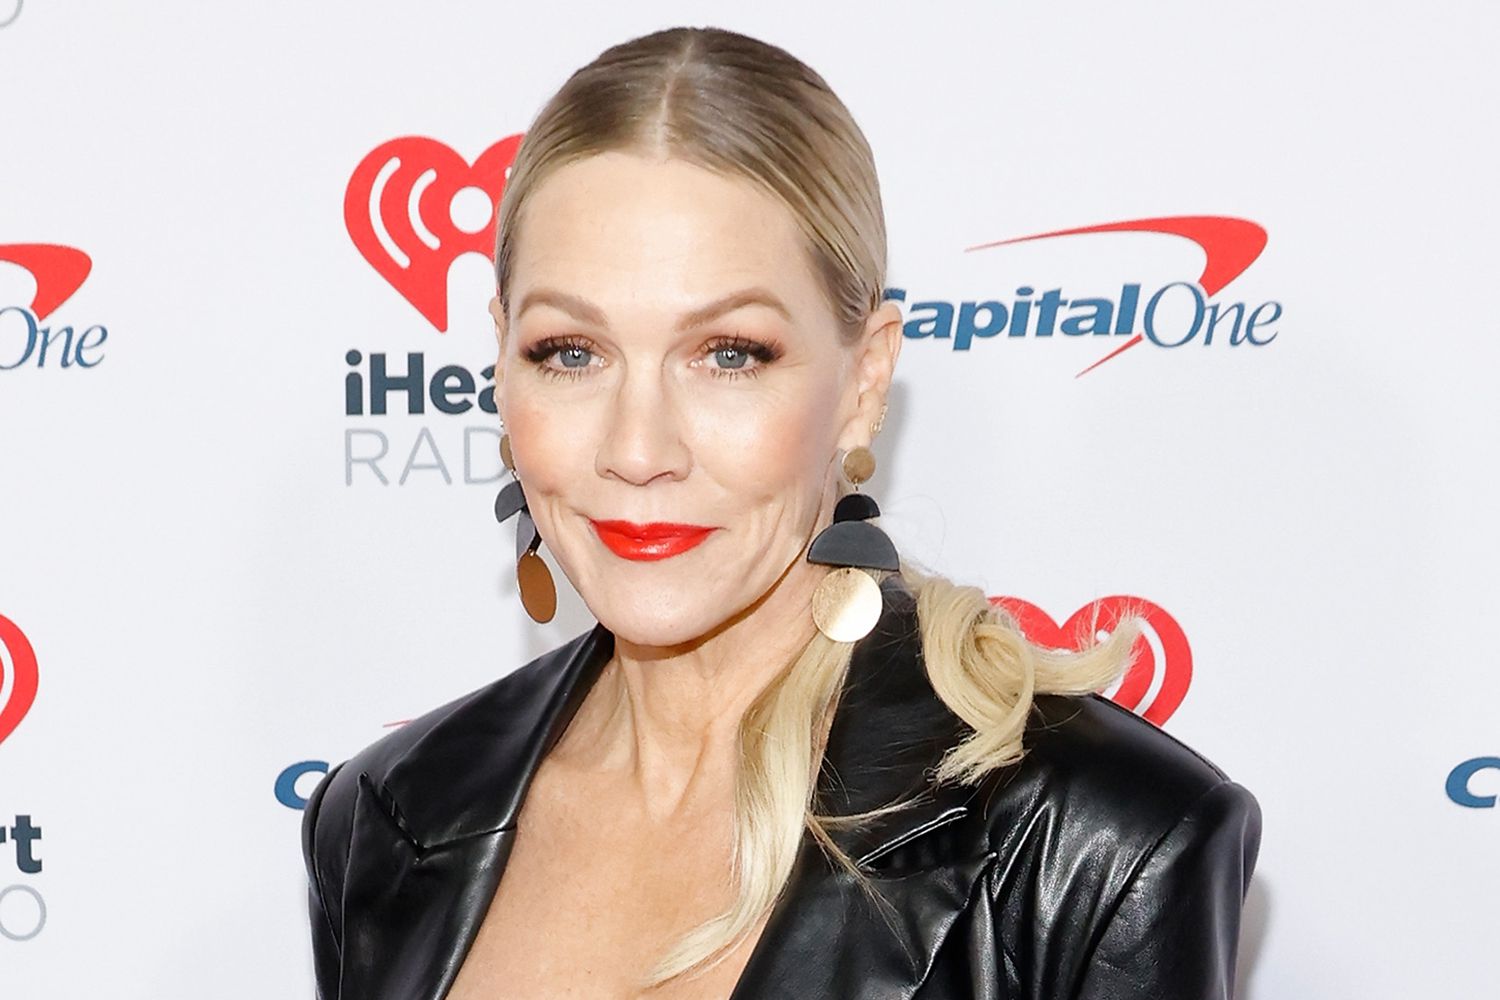 Jennie Garth Says Body Image Is a ‘Roller Coaster’ [Video]